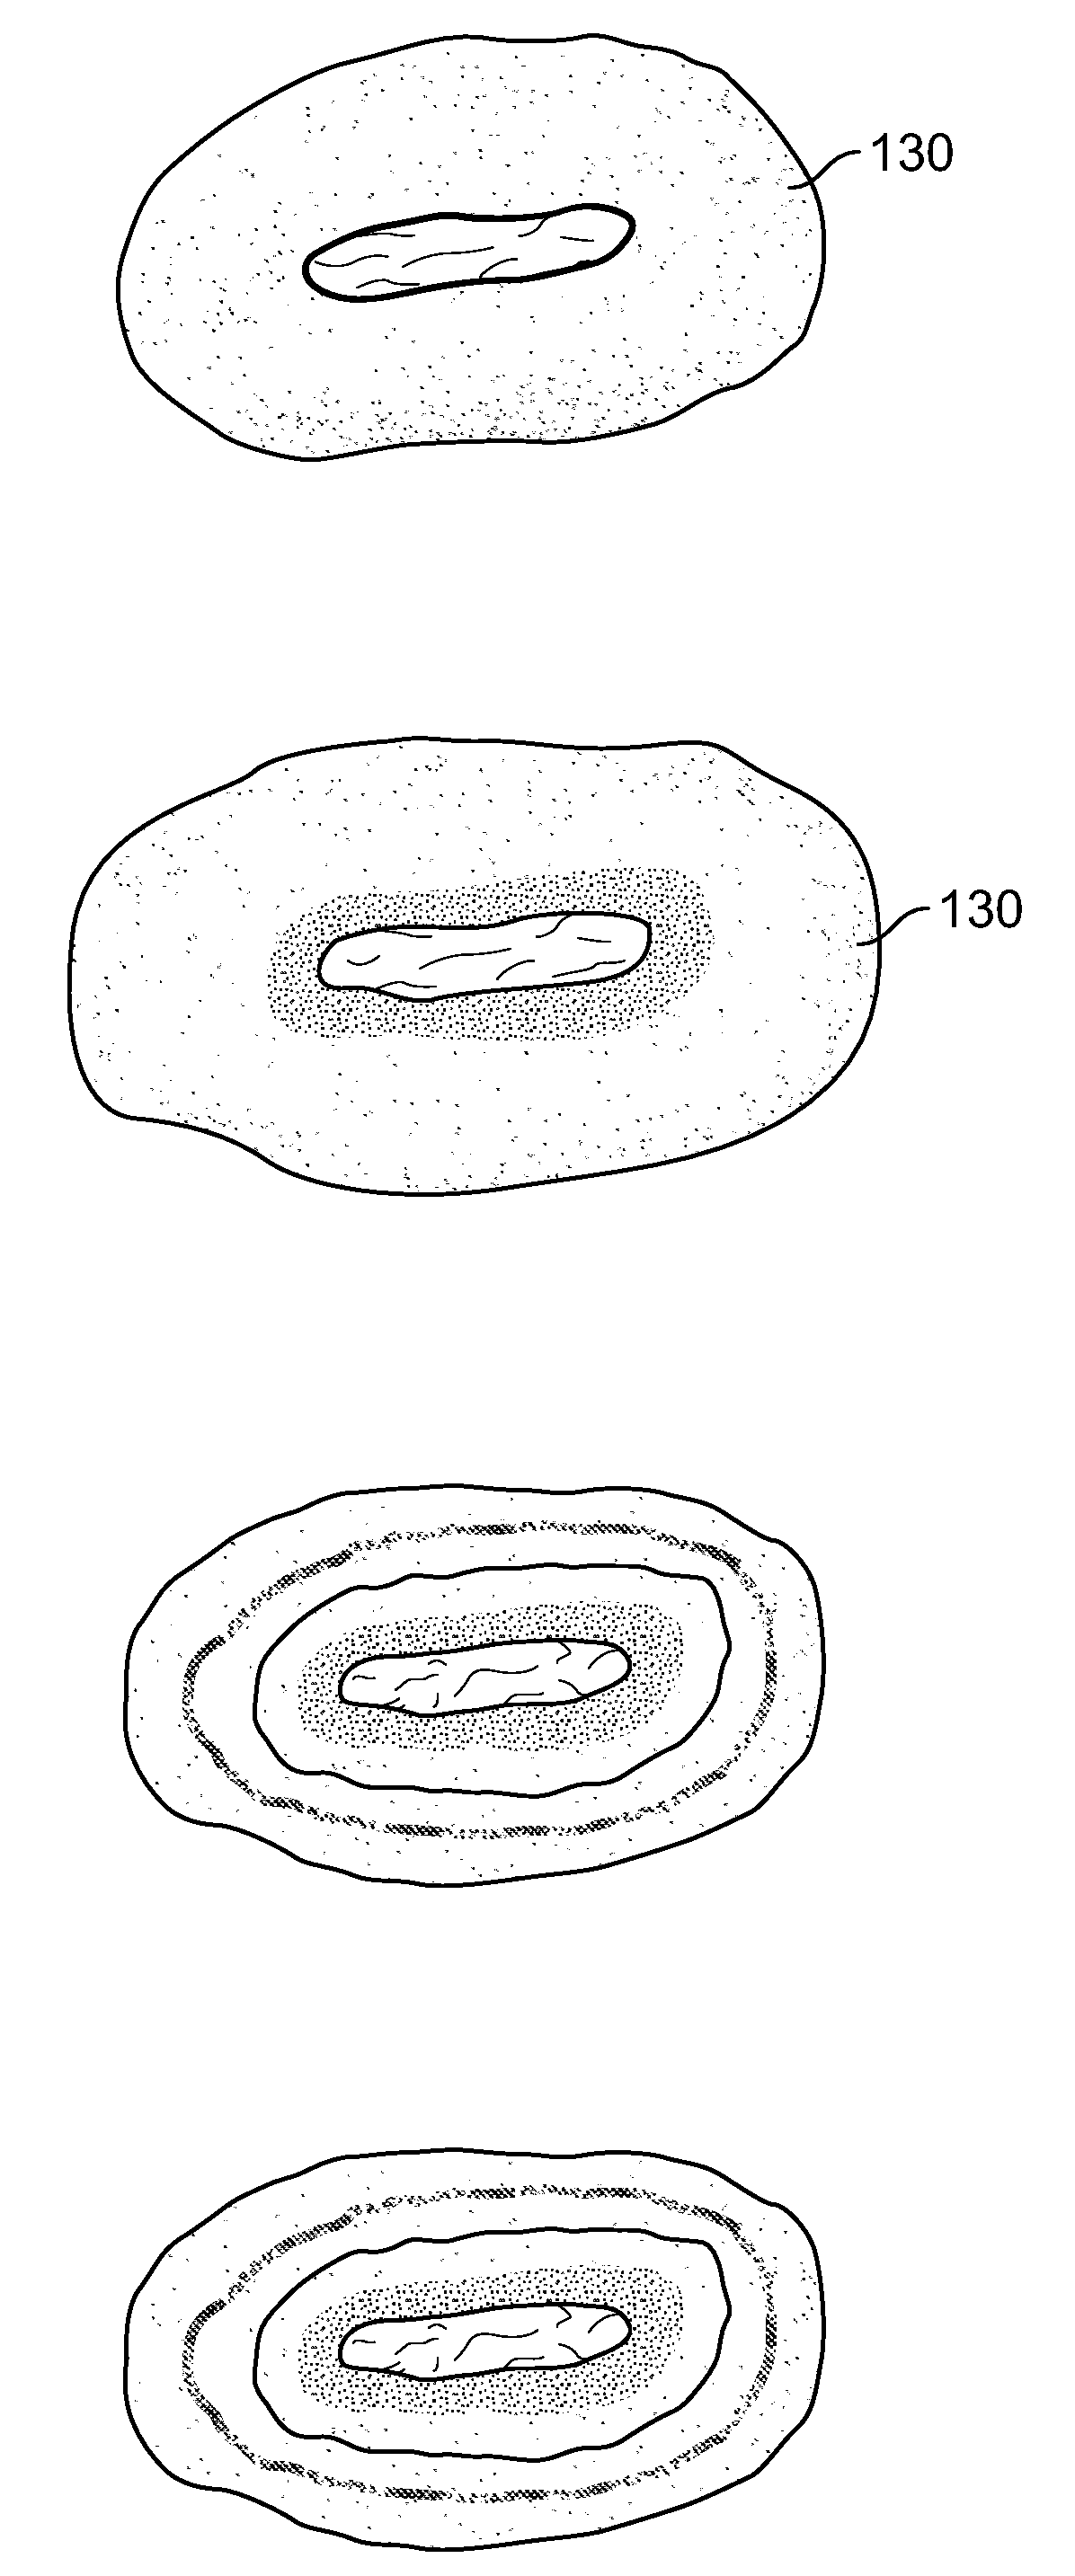 Seed coating compositions and methods for applying soil surfactants to water-repellent soil